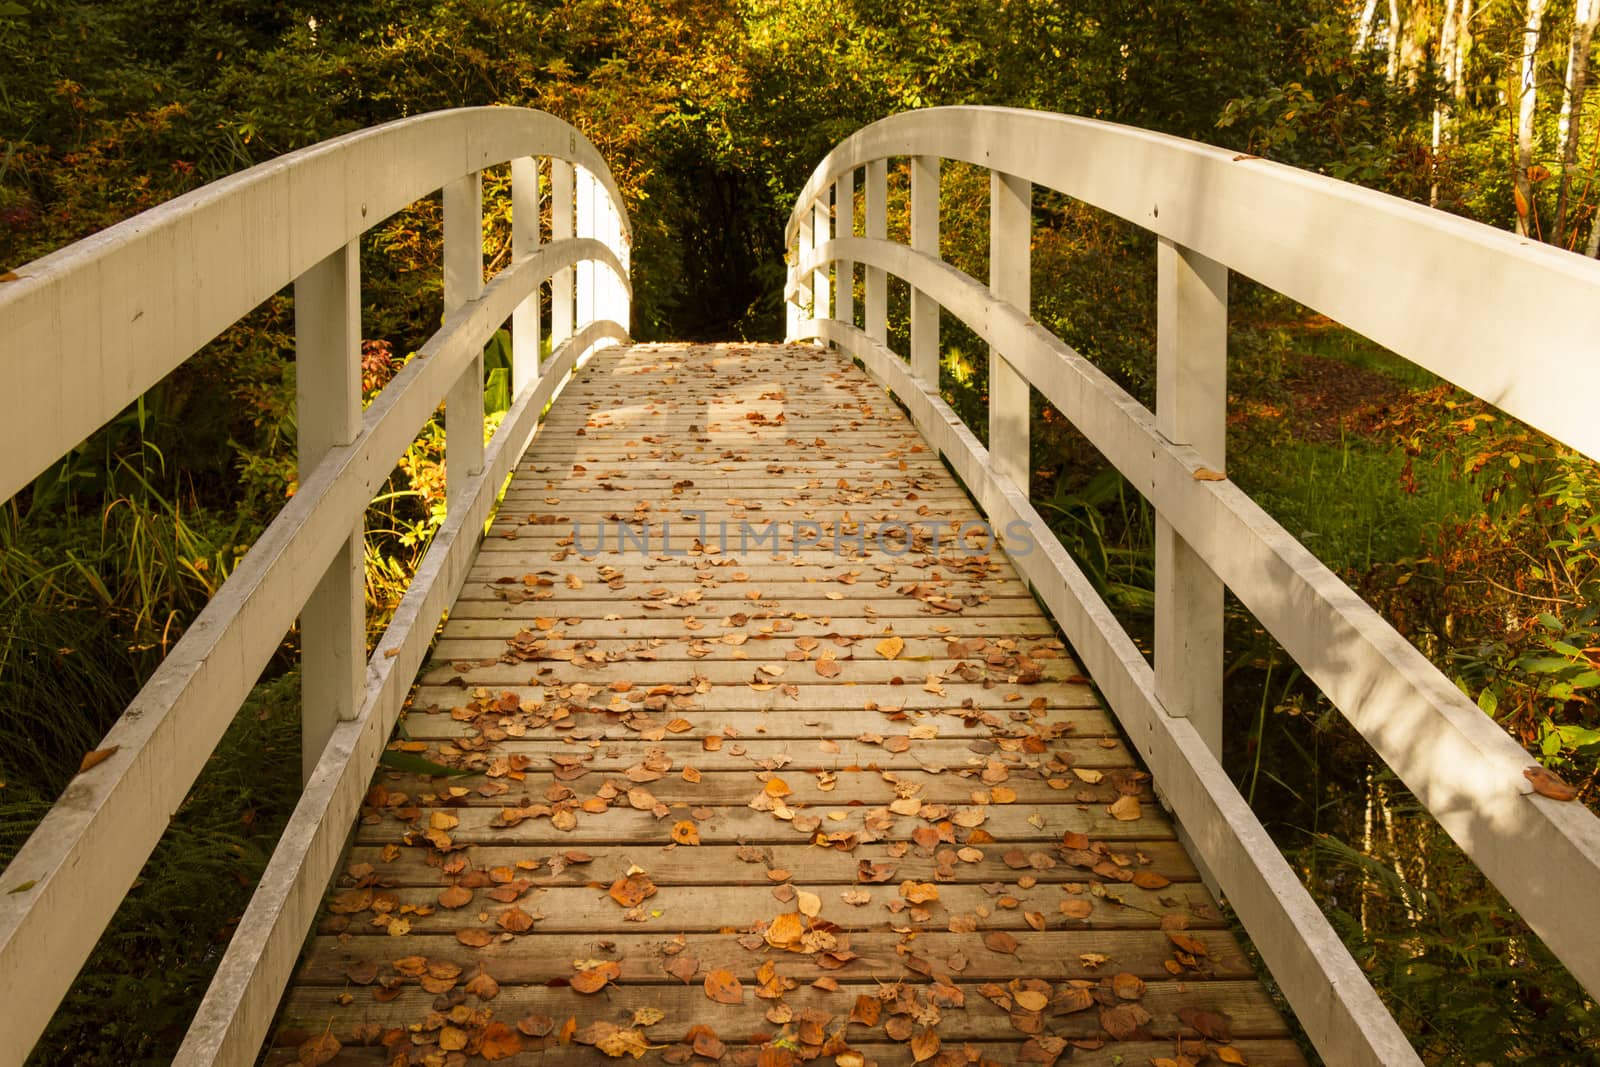 Wooden Bridge in the Park on an Autumn Day